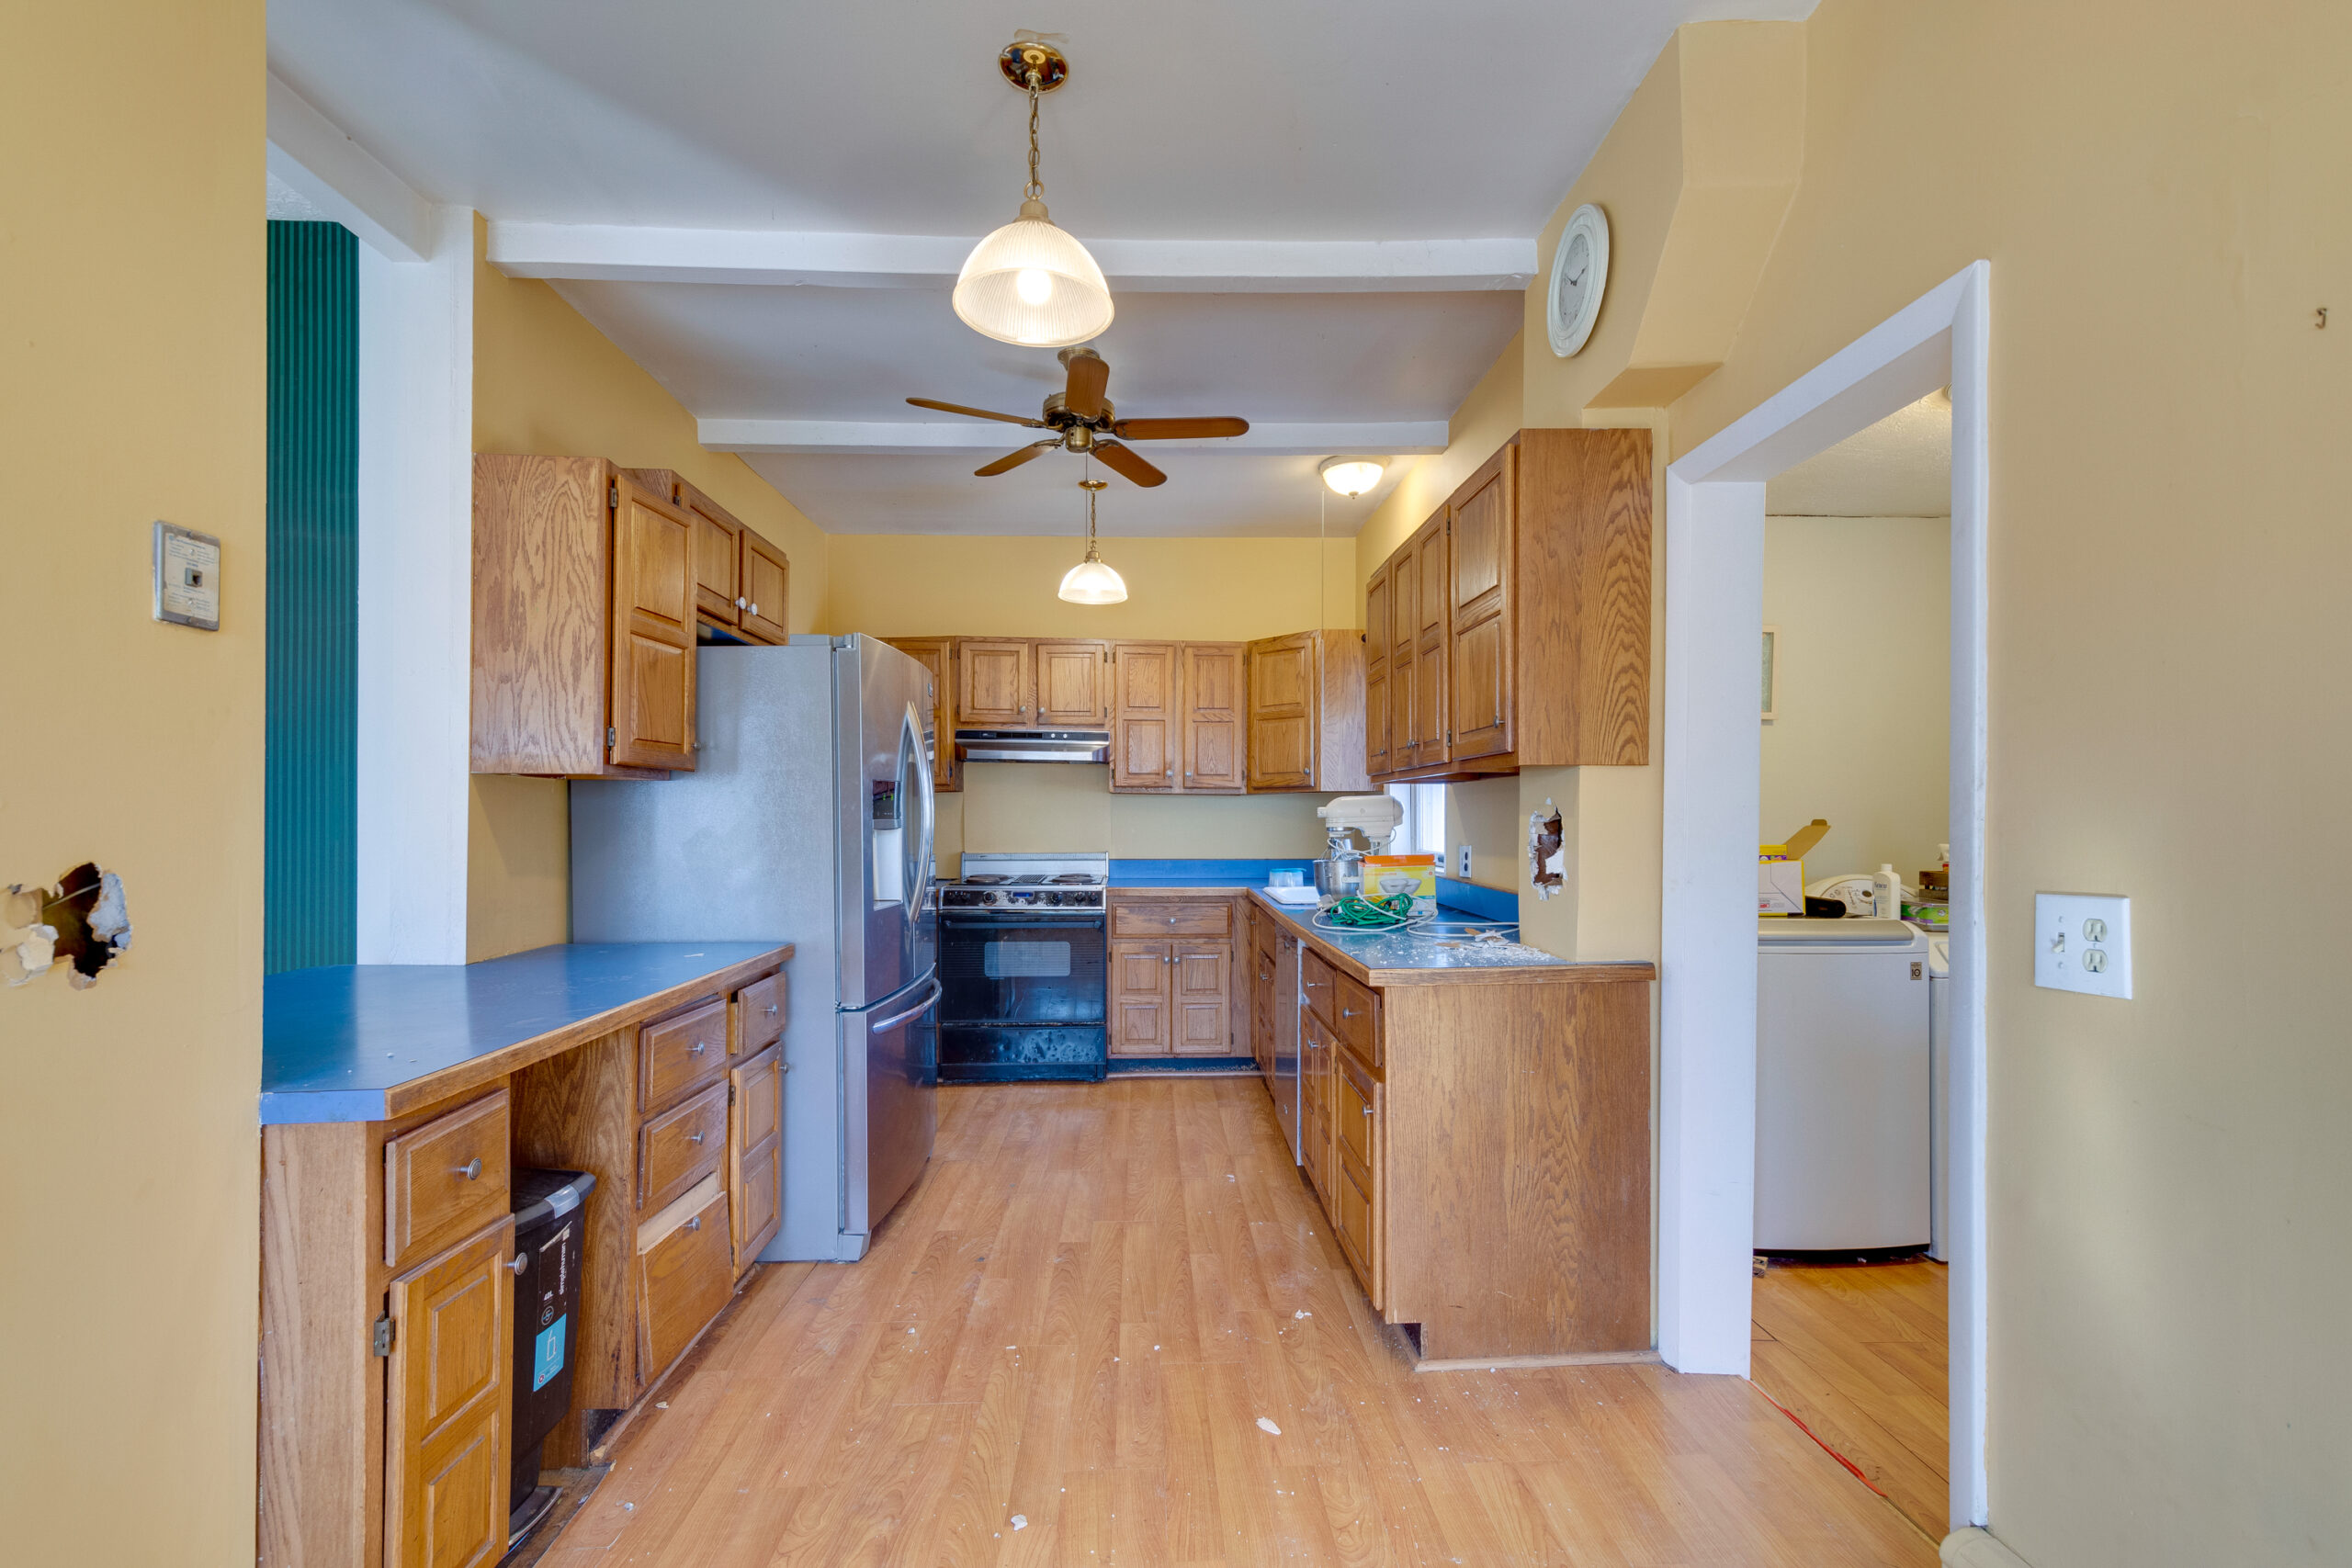 Image of a kitchen in a vintage New England home before renovation, featuring old wooden cabinets, blue countertops, and outdated appliances. The yellow walls and worn flooring further highlight the need for a comprehensive update to bring the space up to modern standards.